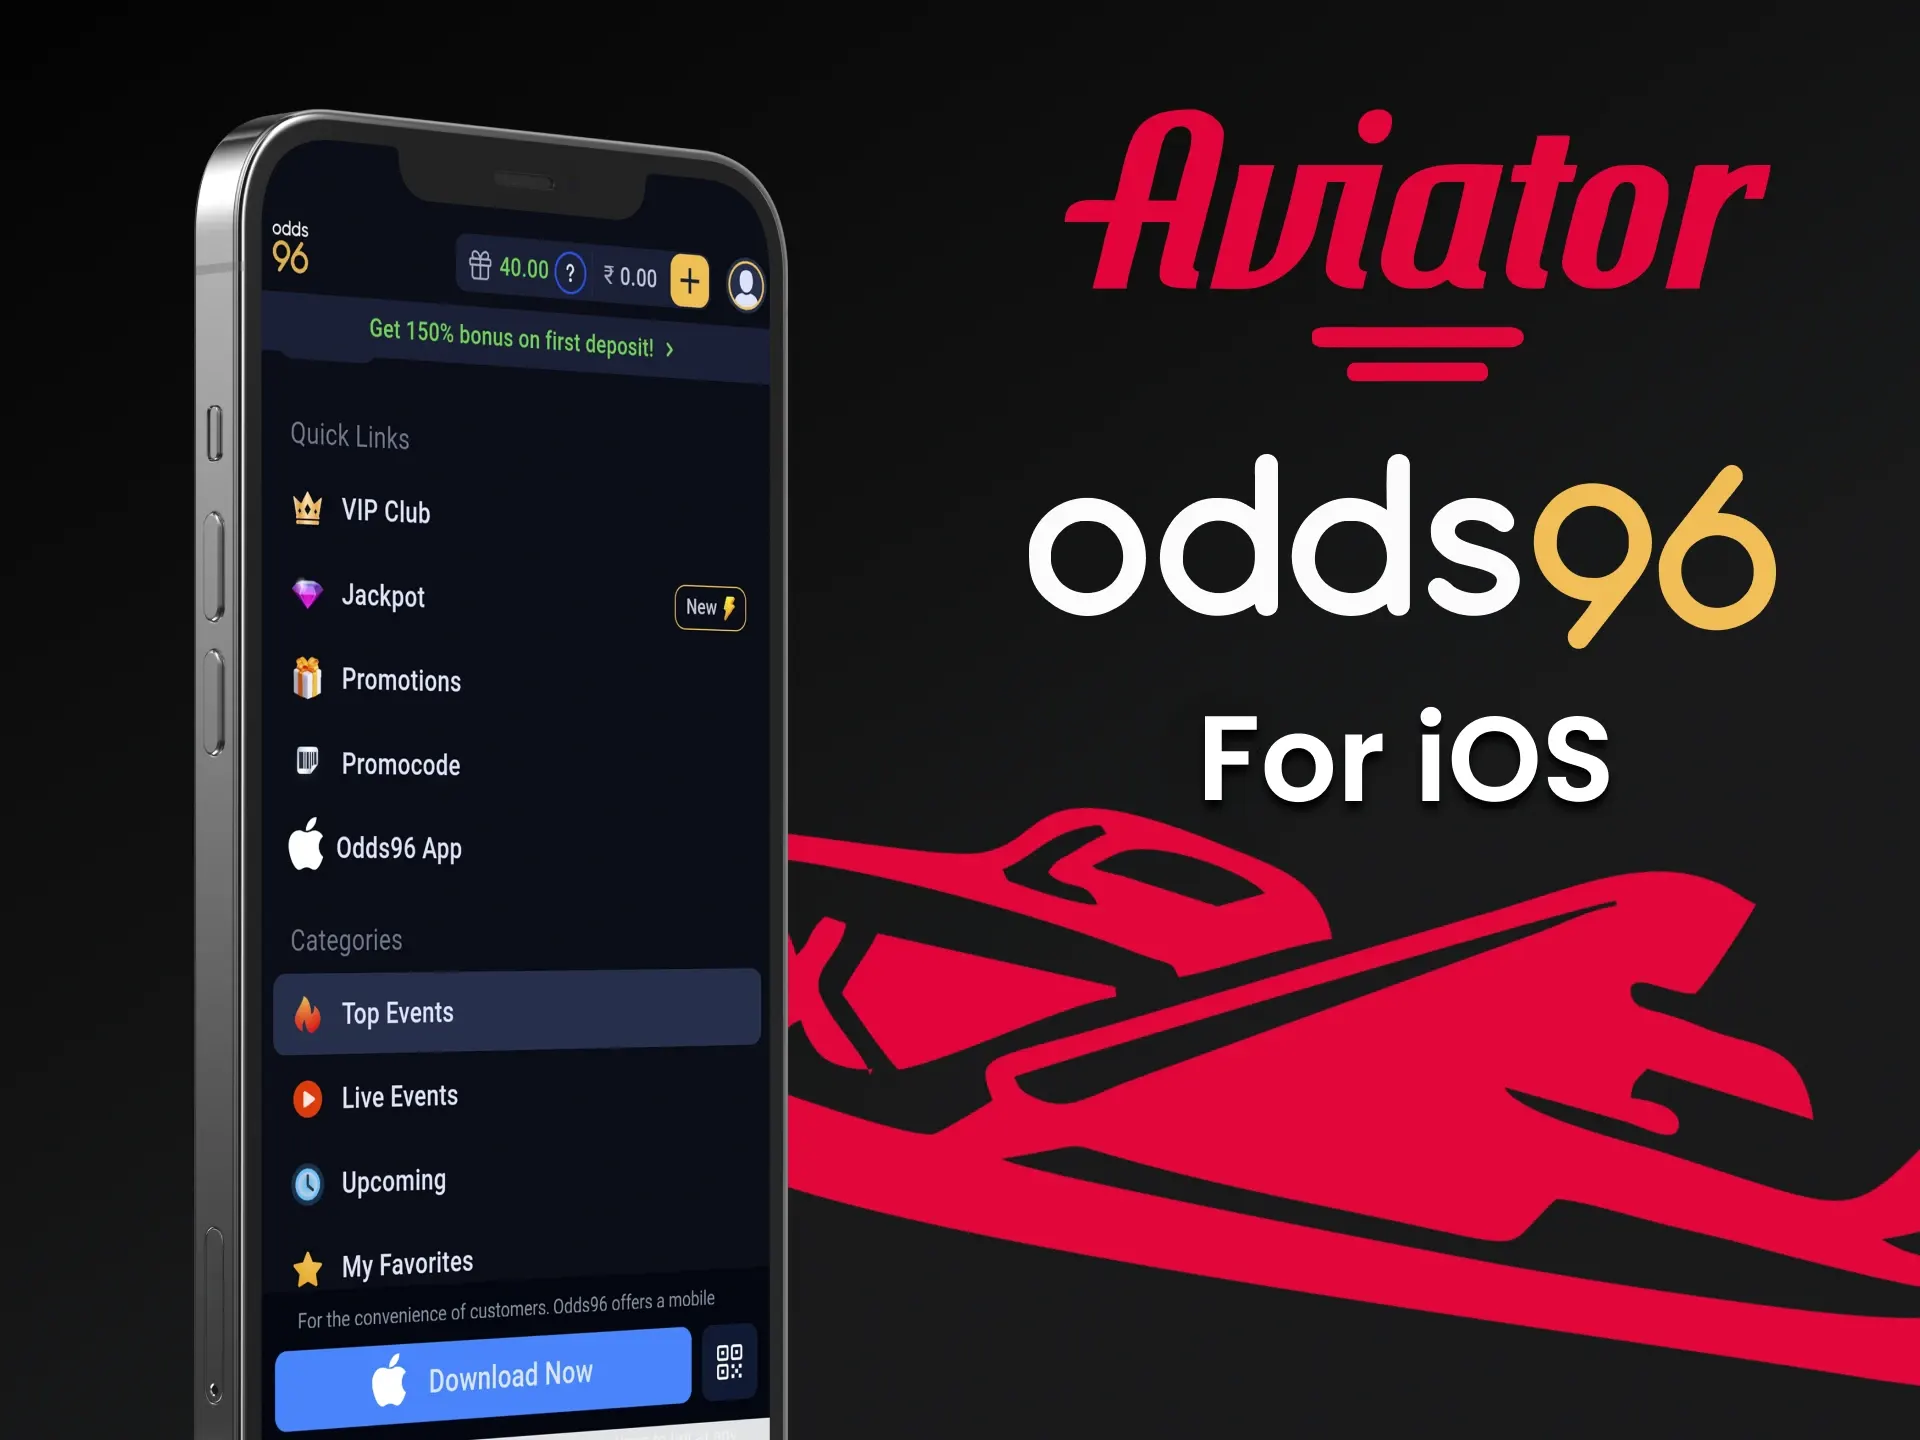 To play Aviator, install the Odds96 application on your iOS device.